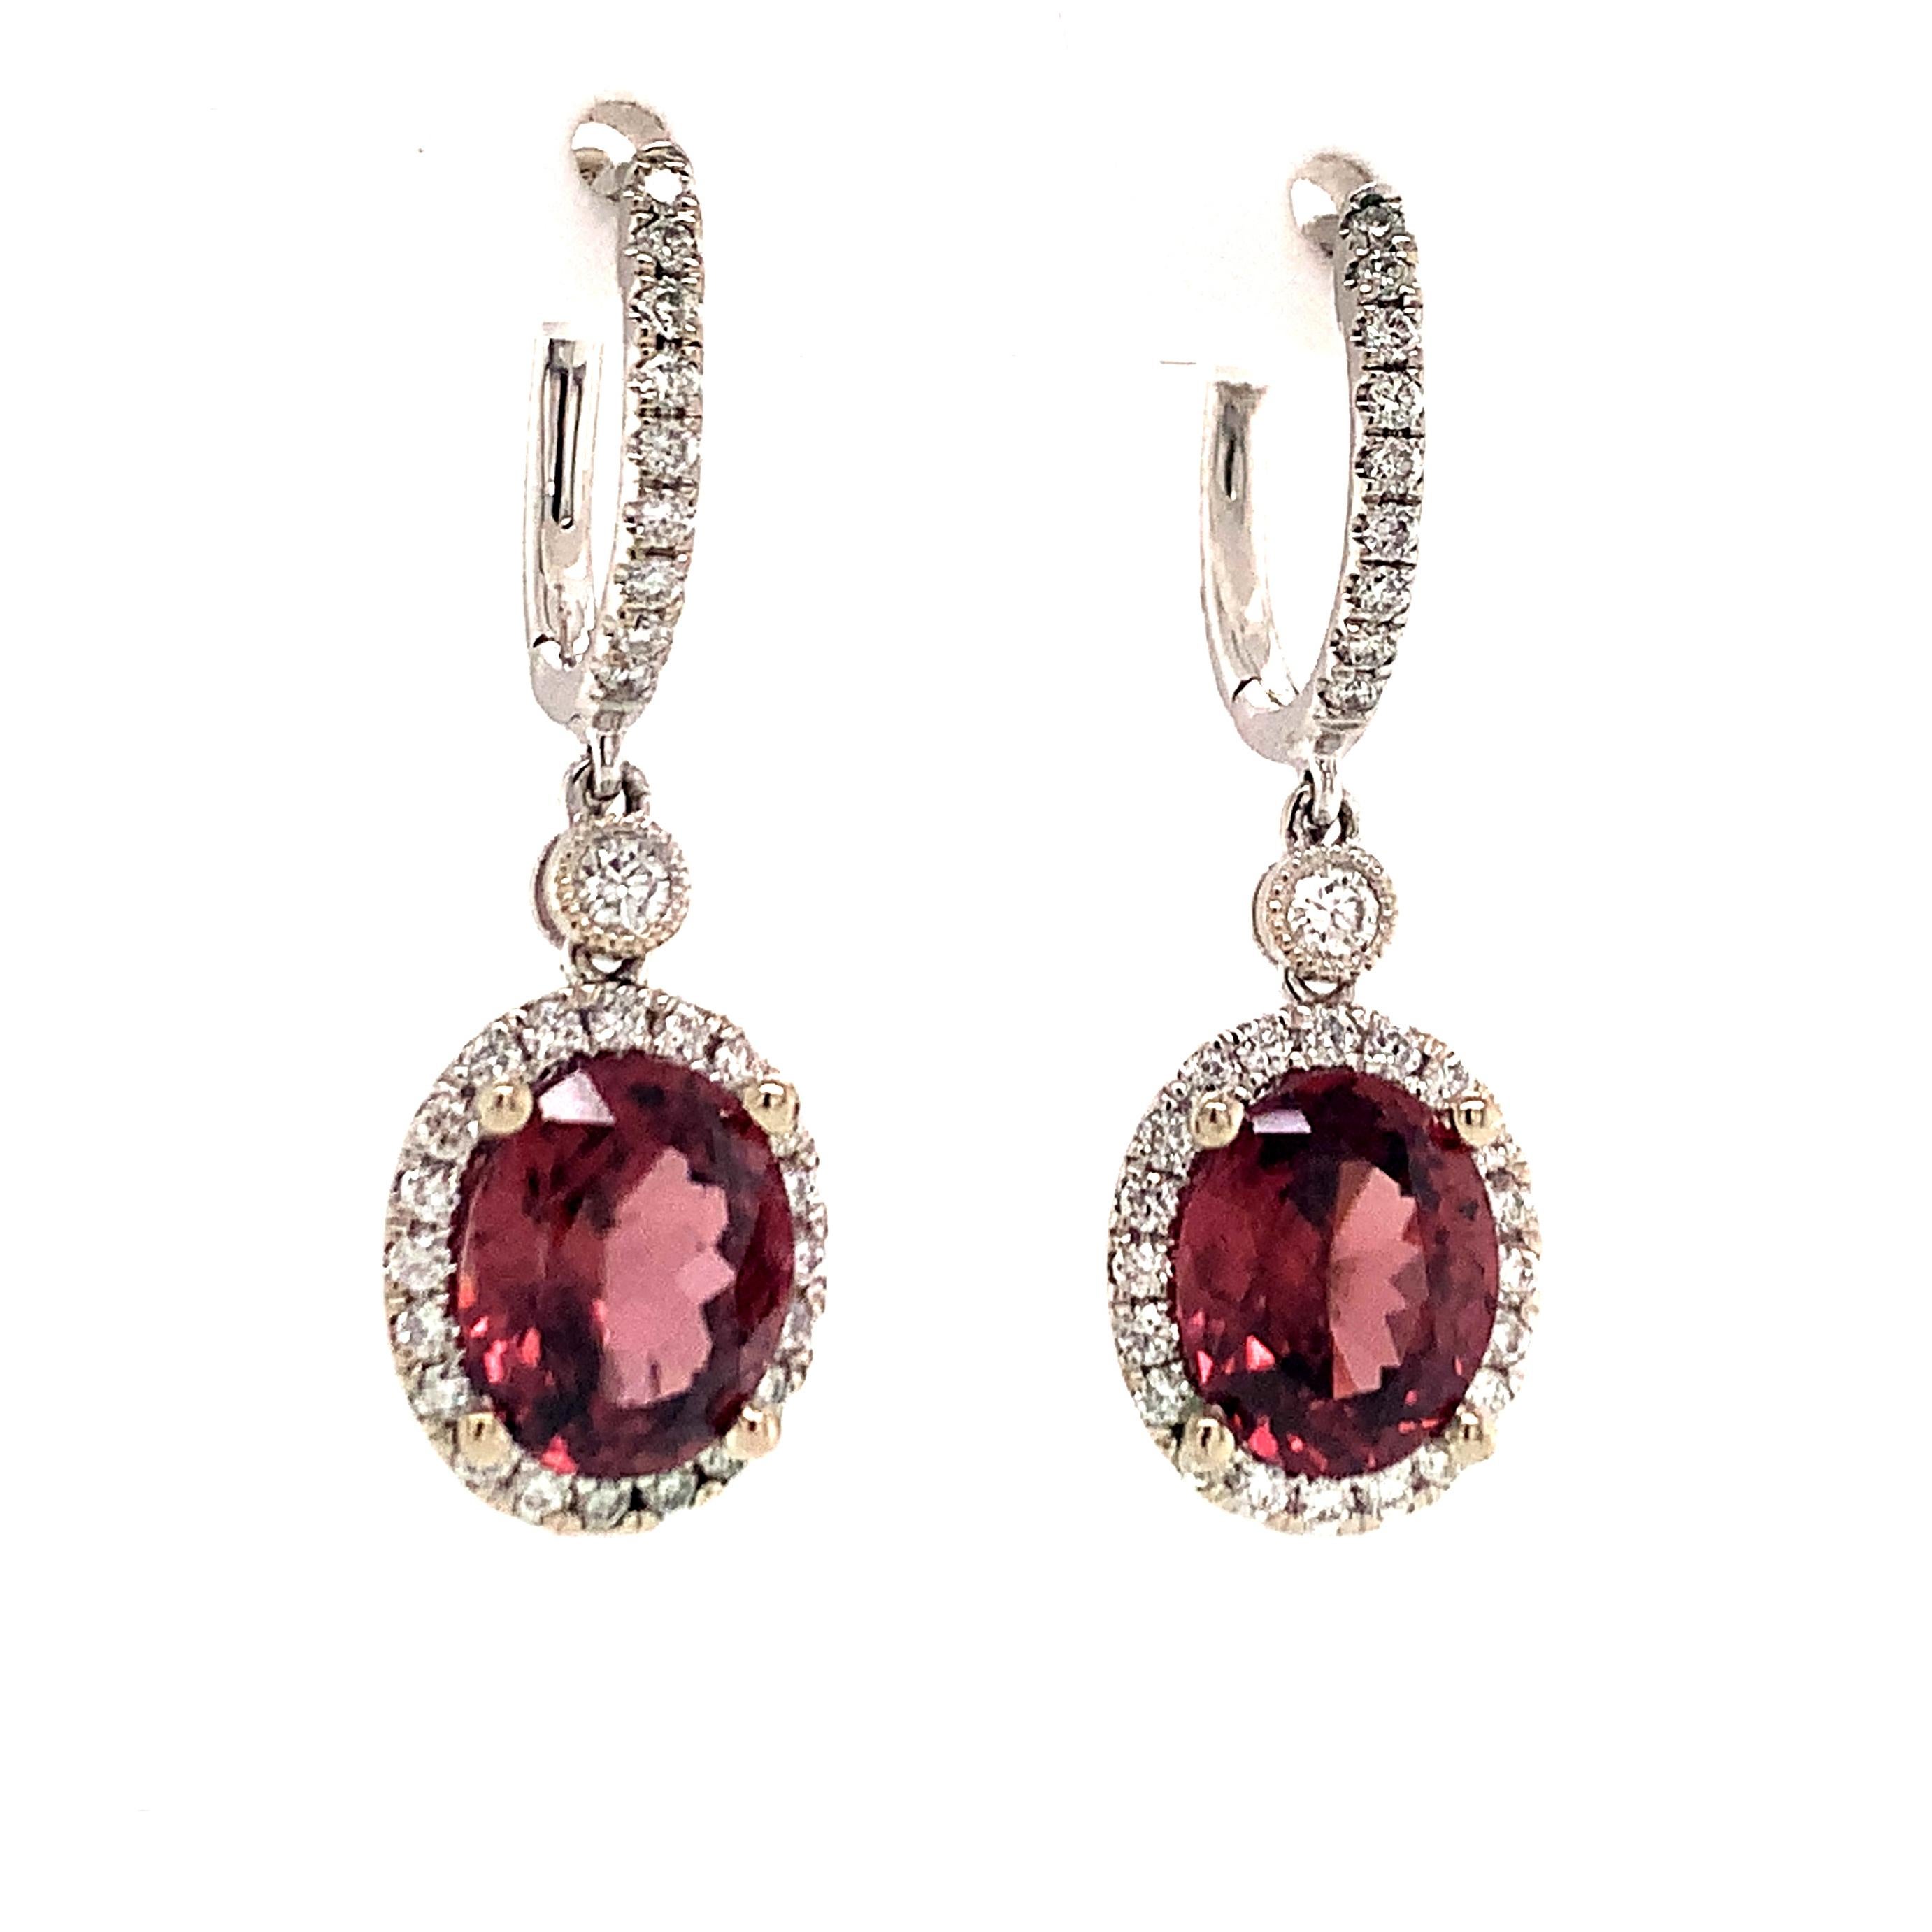 Natural Tourmaline Rubellite Diamond Earrings 18k Gold 6.62 TCW Certified For Sale 2